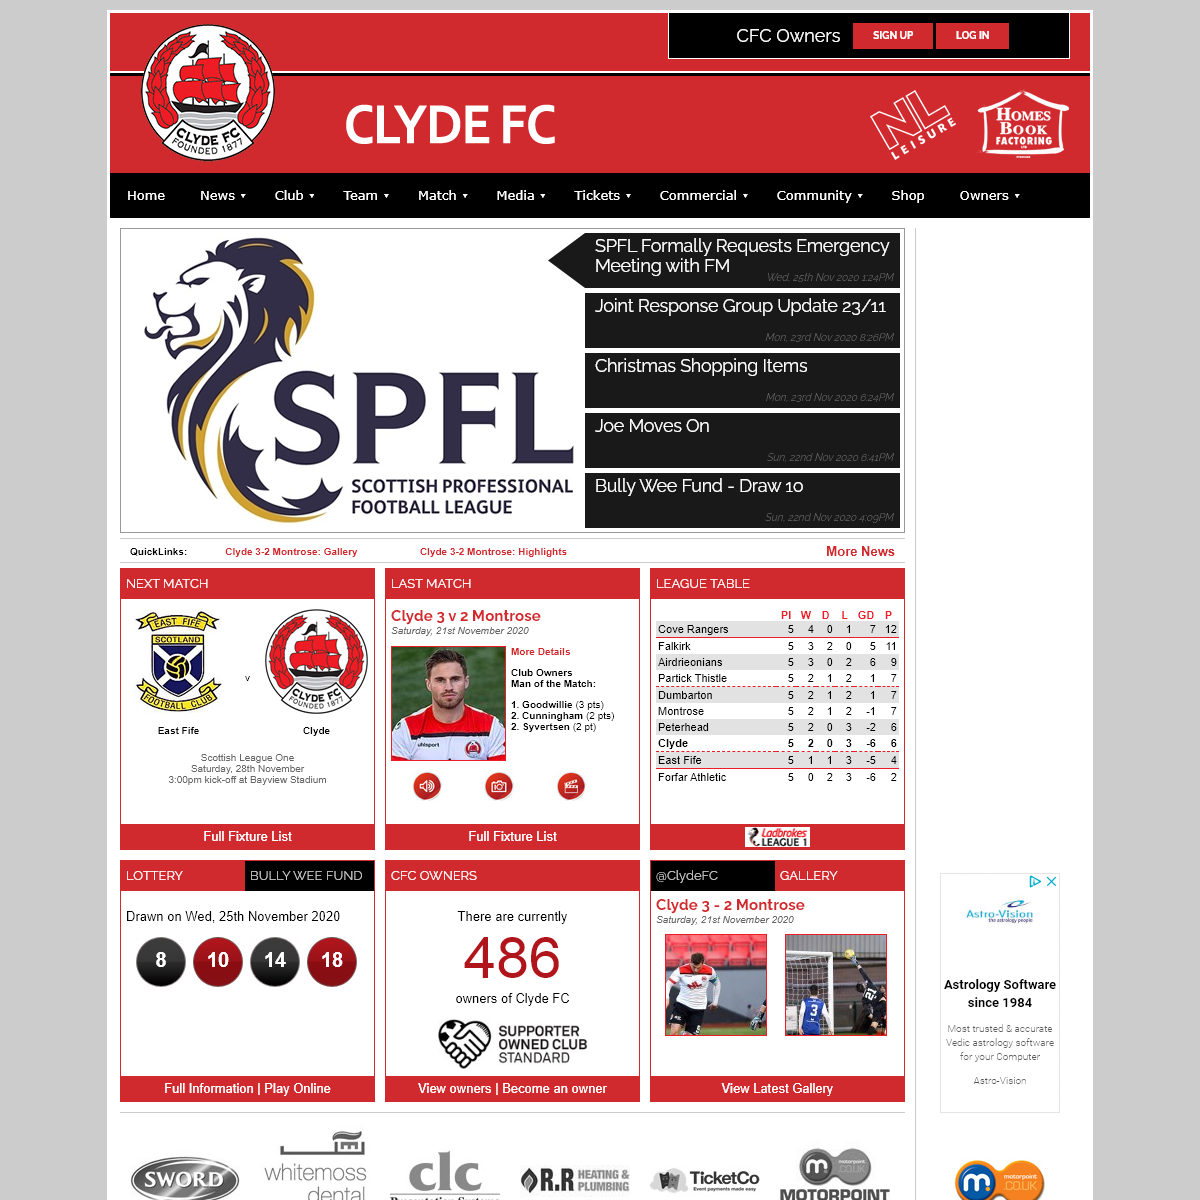 A complete backup of clydefc.co.uk